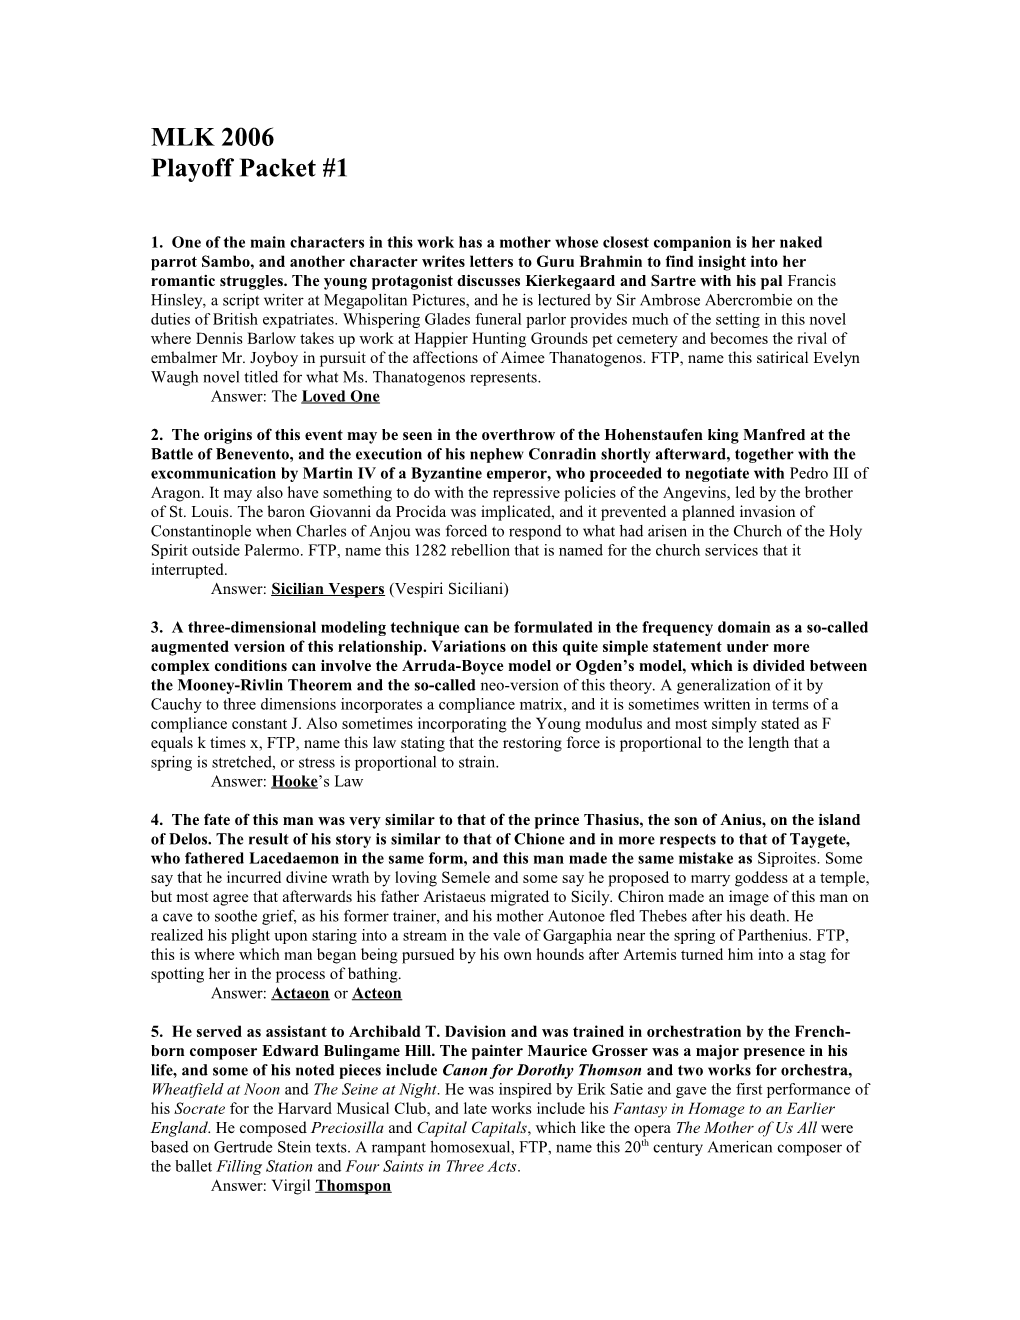 Playoff Packet #1